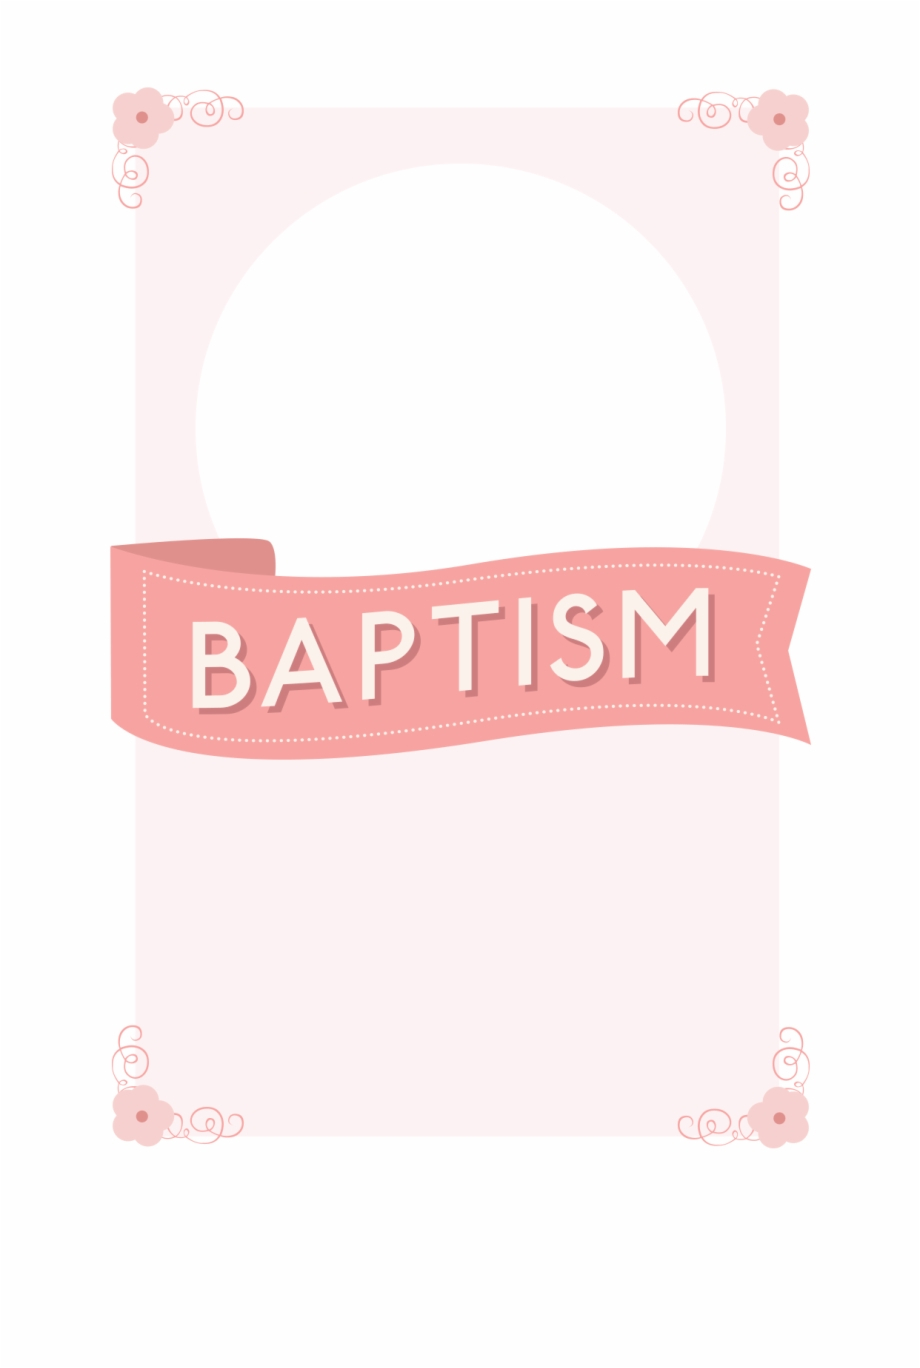 032 Template Ideas 1508436 Free Printable Baptism Within Blank Christening Invitation Templates